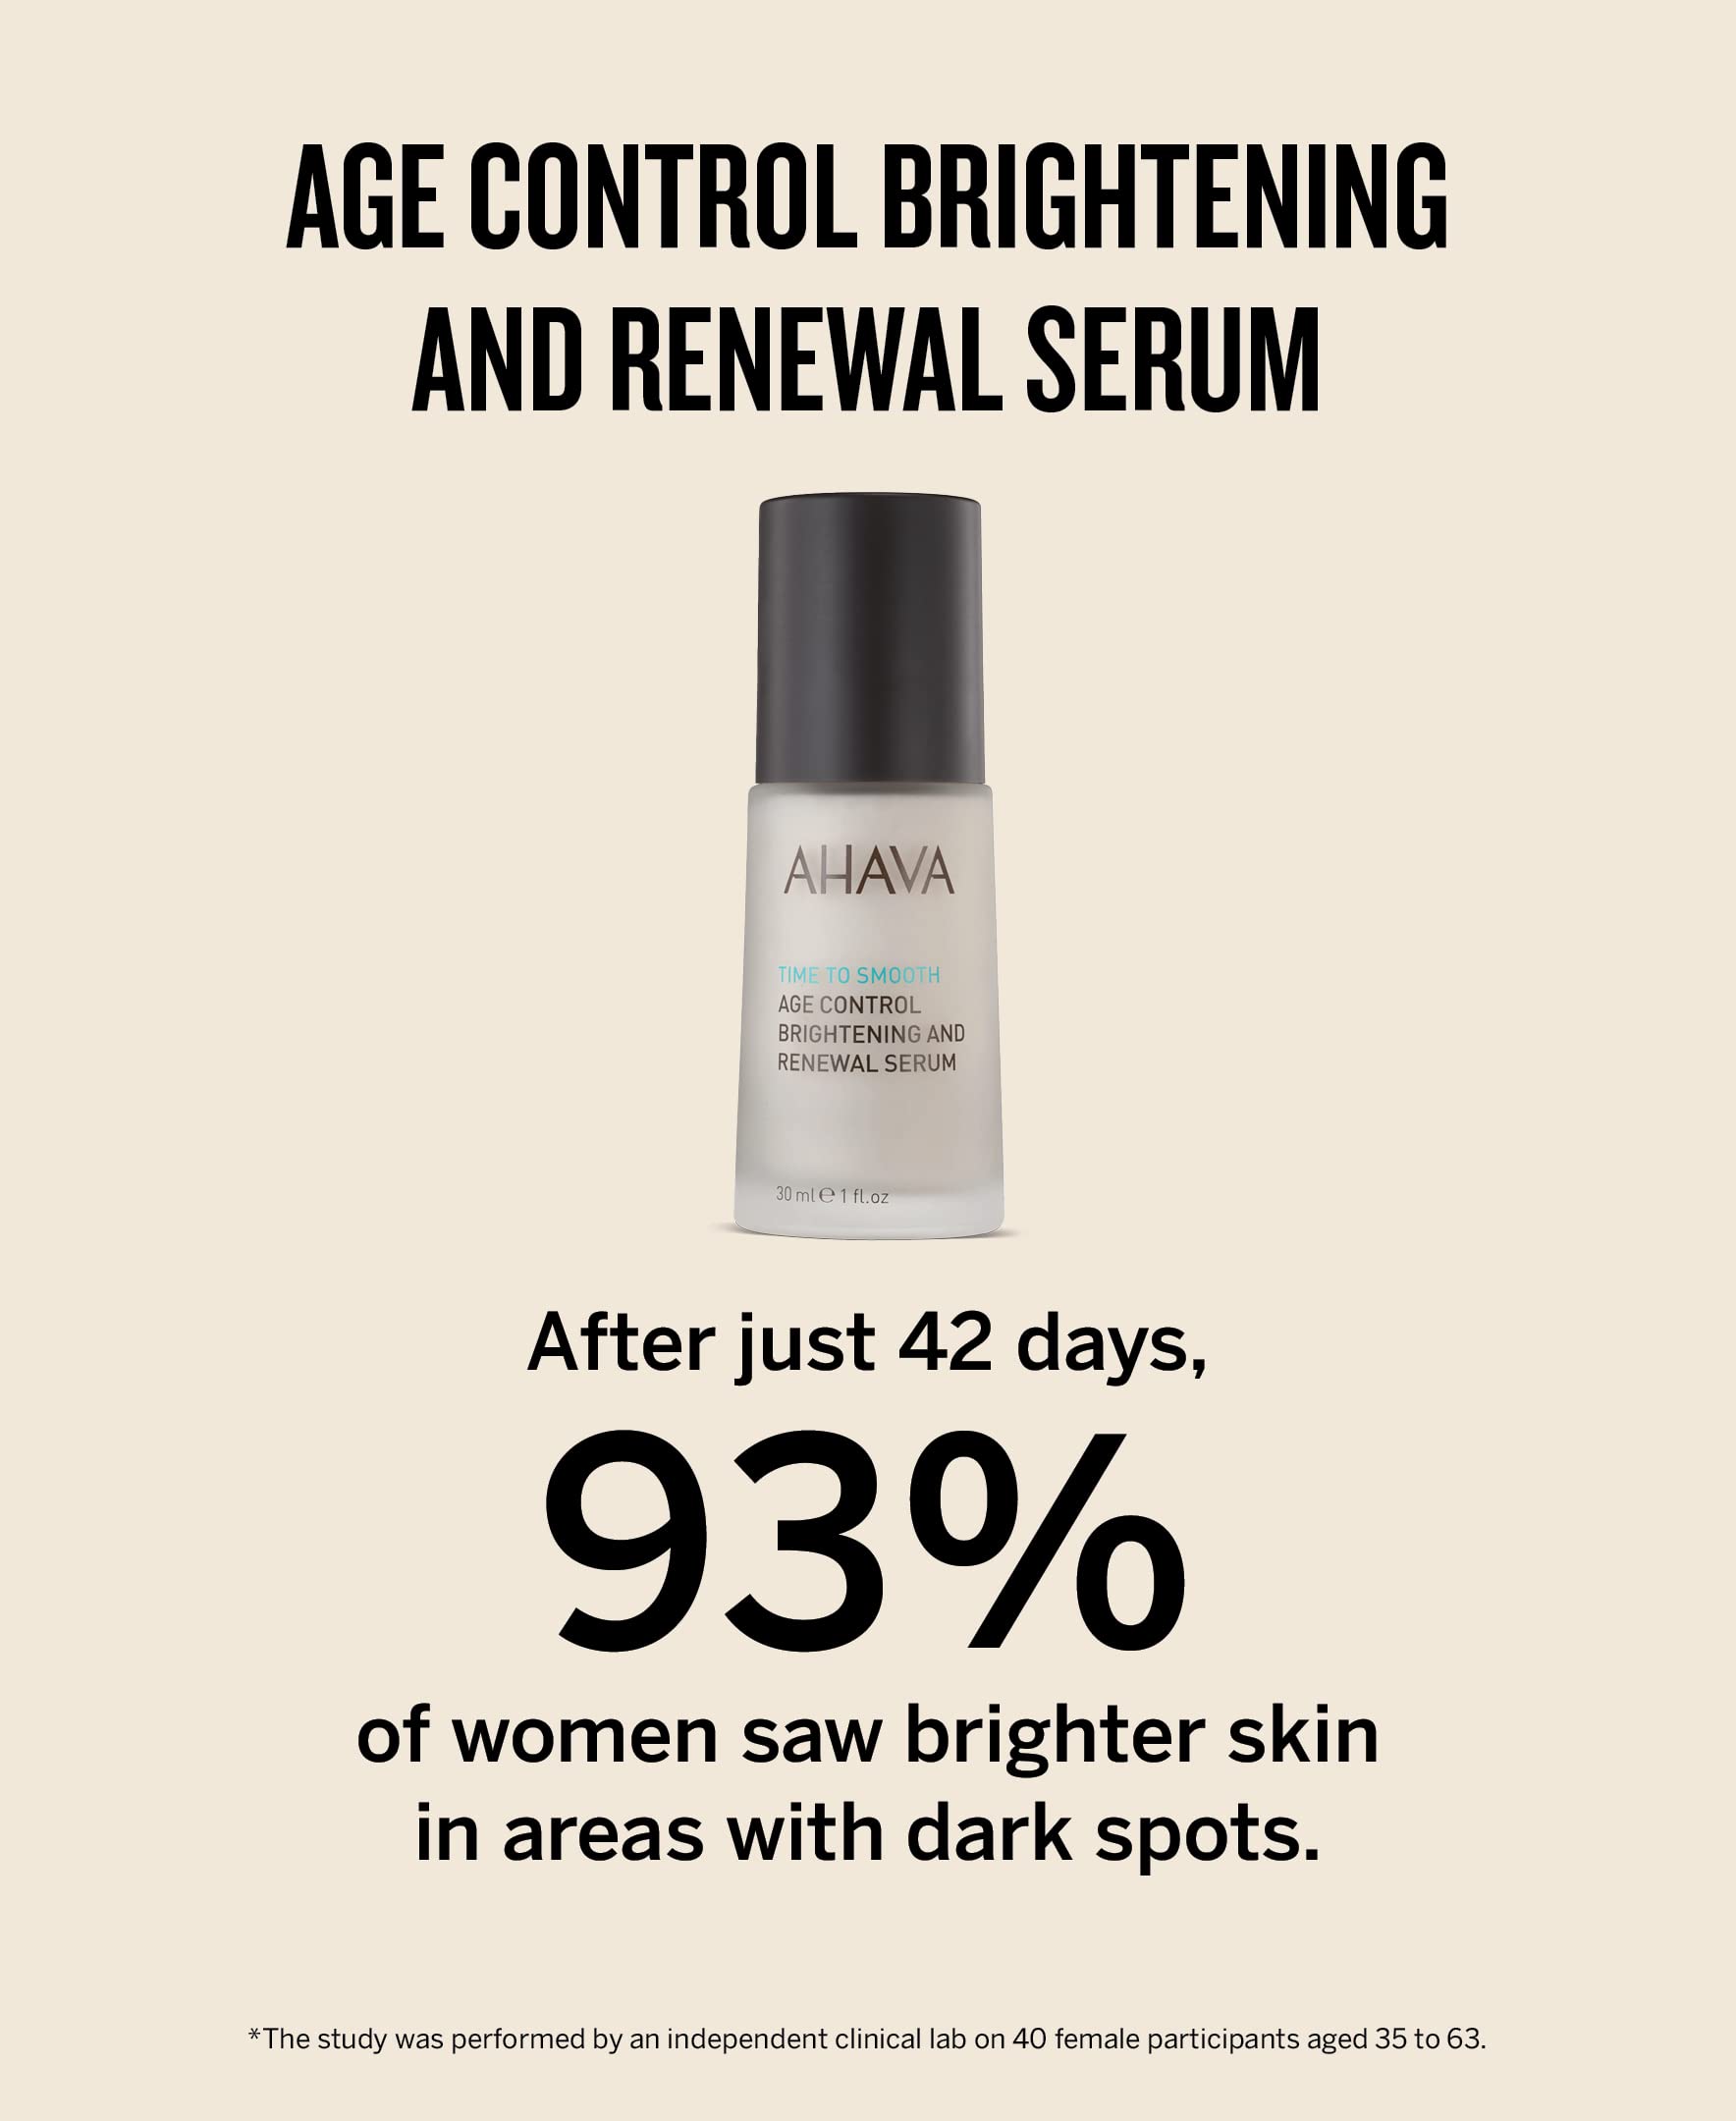 AHAVA Time To Smooth Age Control, Serum, 1.0 Ounce(Pack of 1)